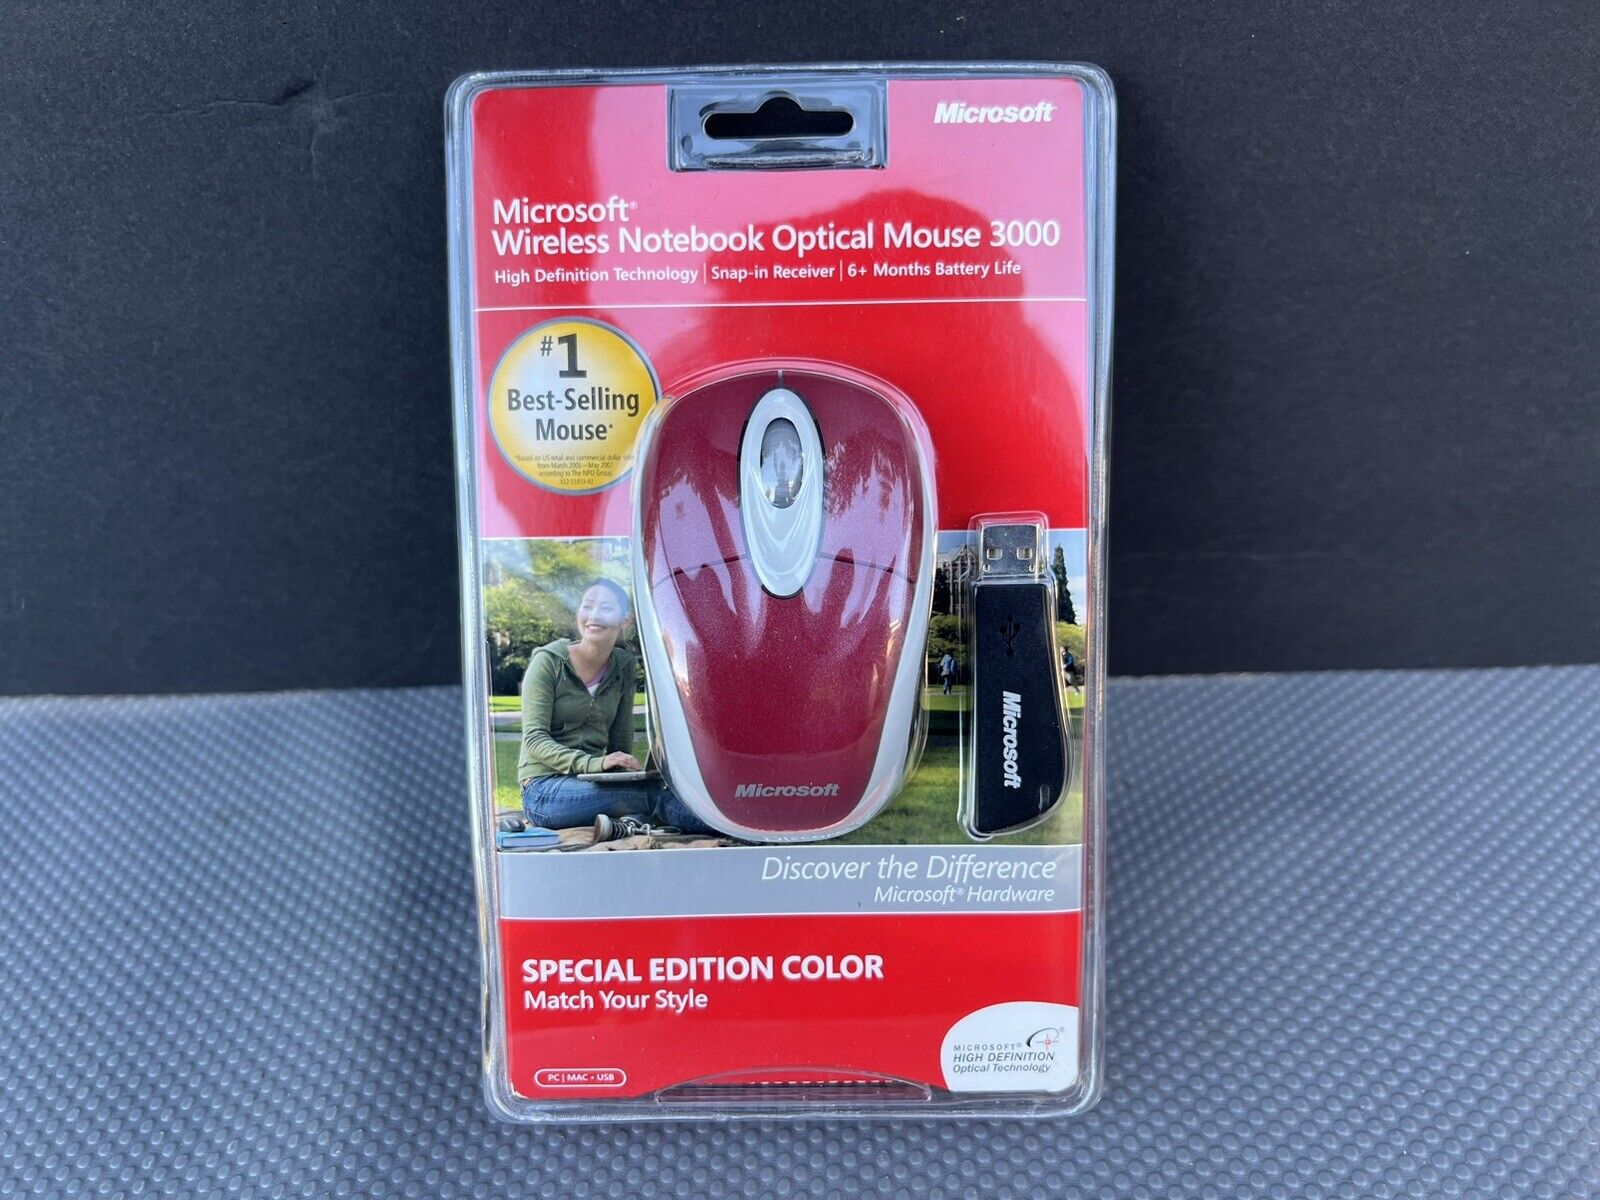 Microsoft Wireless Notebook Optical Mouse 3000 -Special Edition Color Dark Red